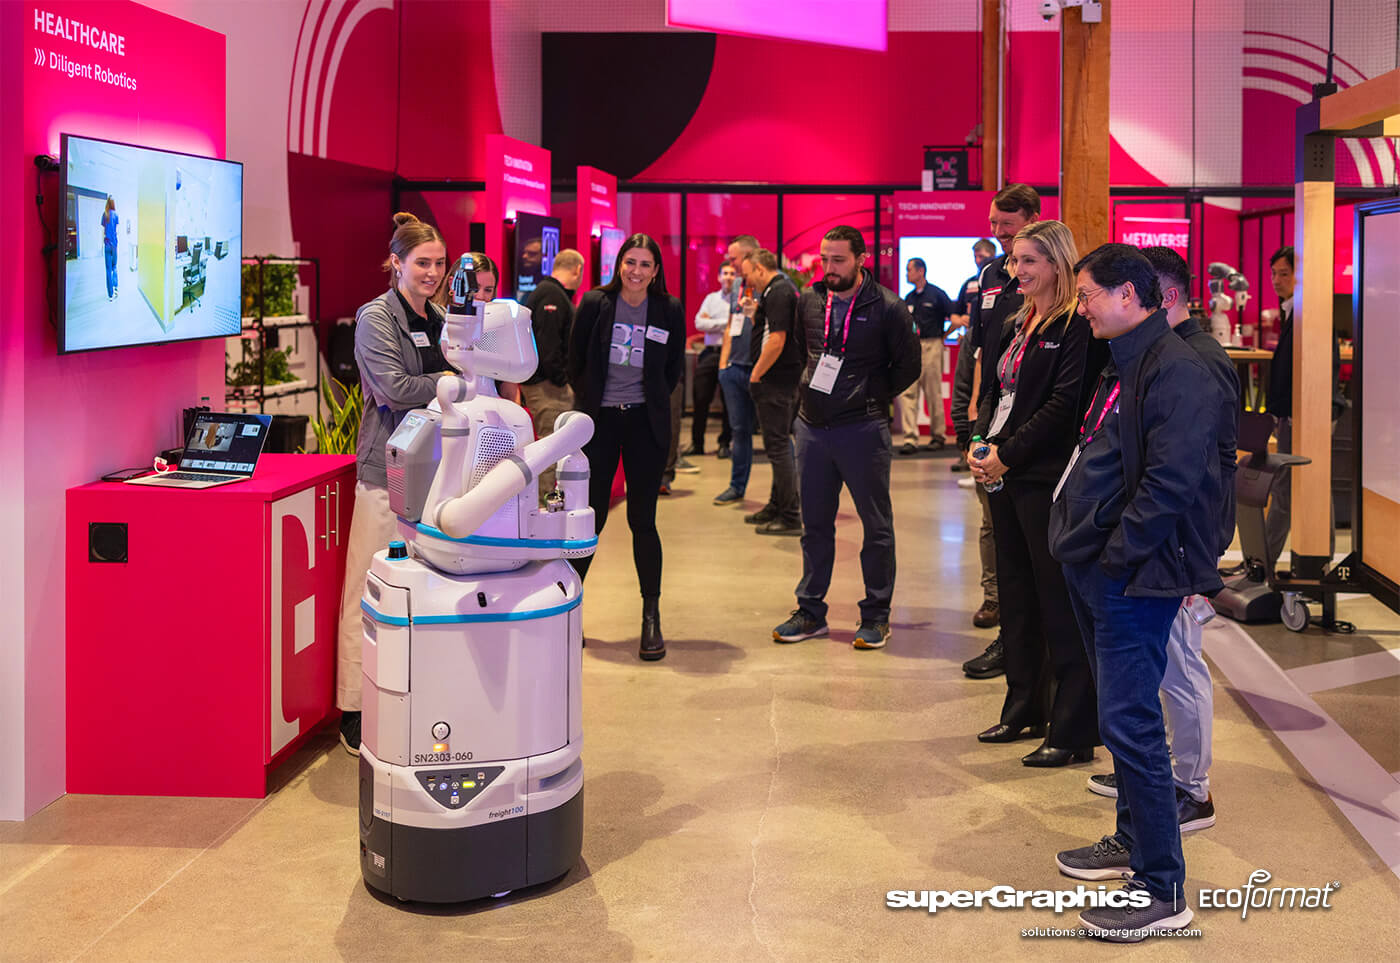 A robot display at a T-Mobile event with vibrant pink branding and interactive screens.